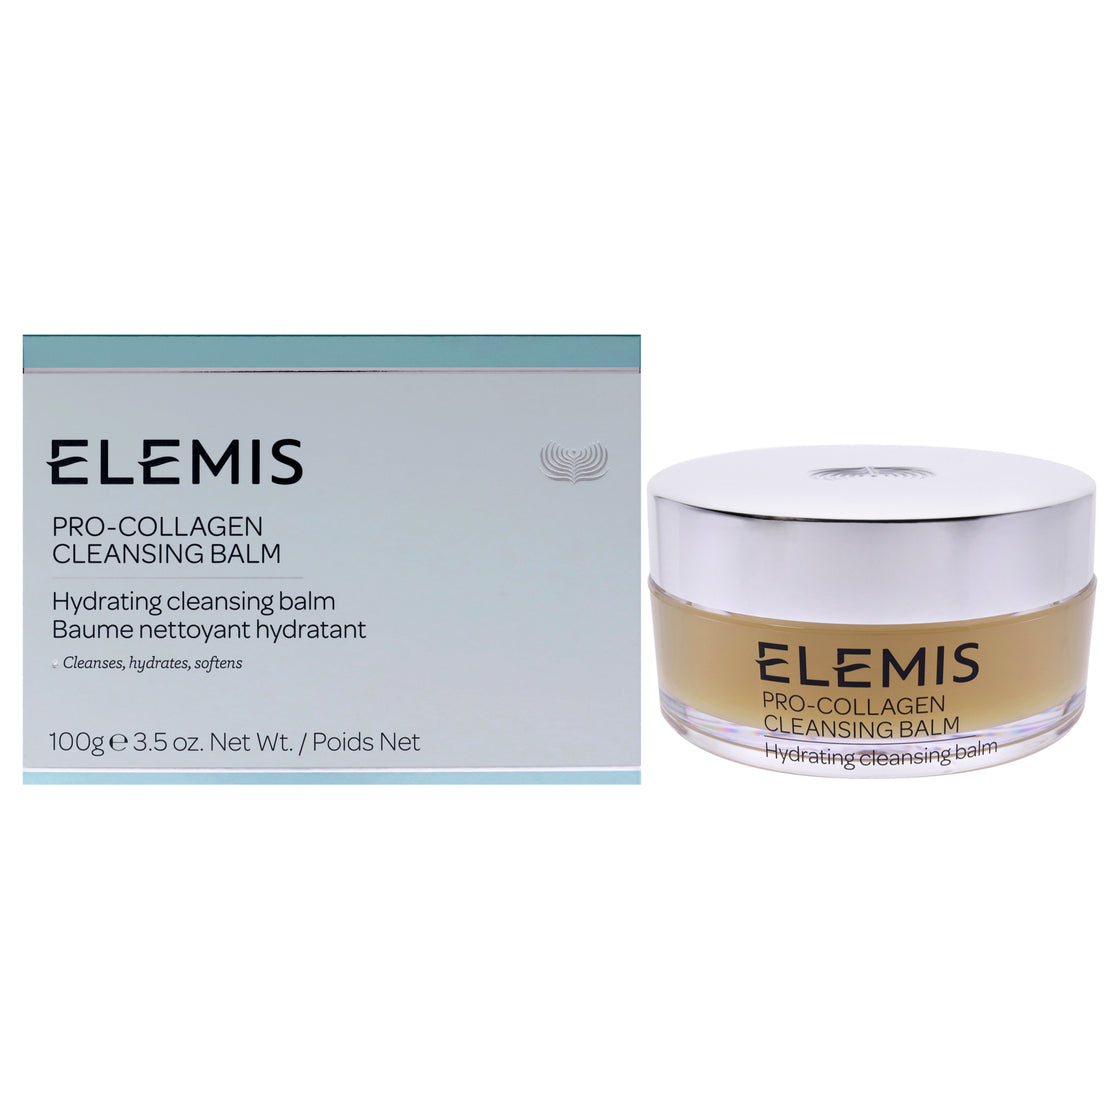 Pro-Collagen Cleansing Balm by Elemis for Unisex - 3.5 oz Cleanser